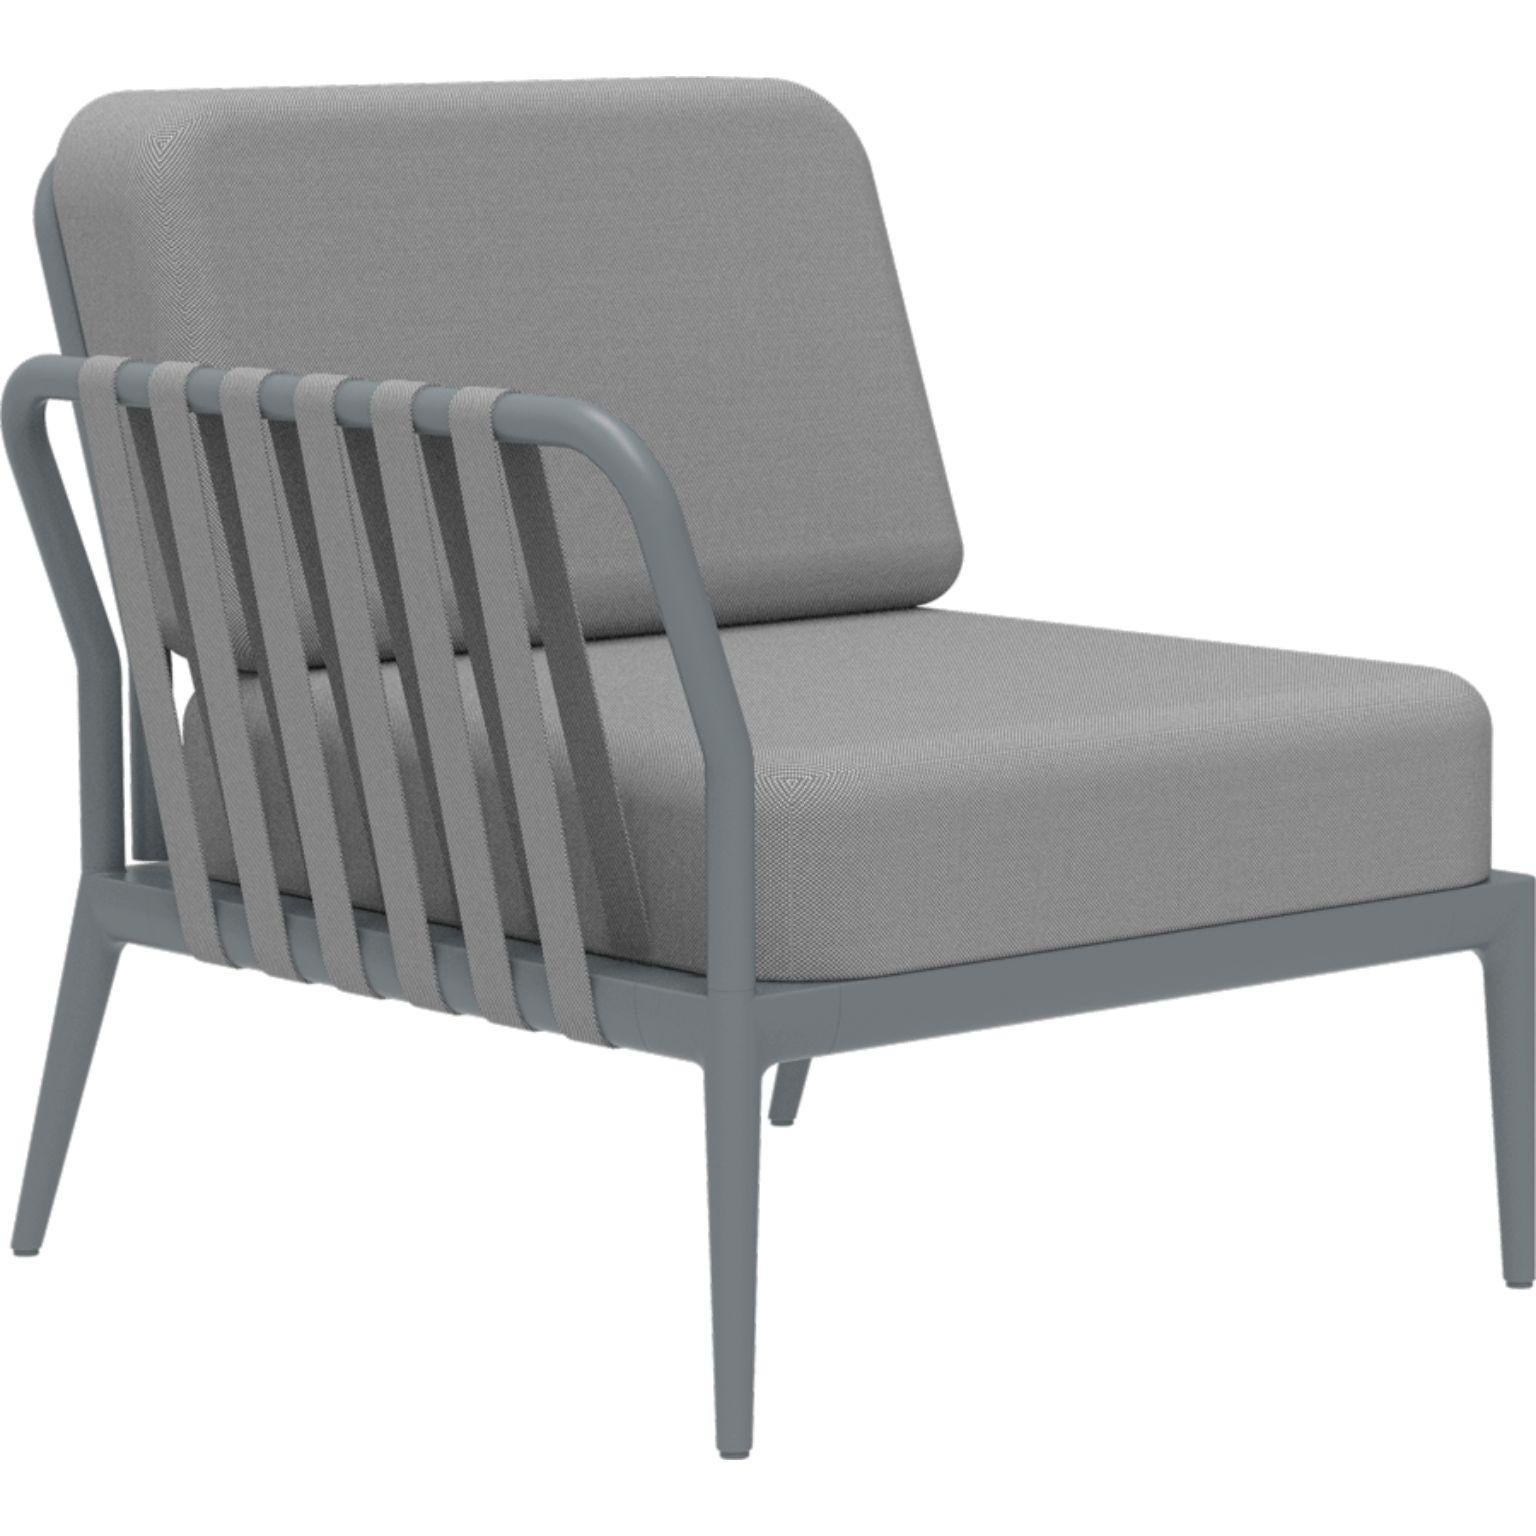 Ribbons grey right modular sofa by MOWEE
Dimensions: D83 x W80 x H81 cm (seat height 42 cm)
Material: aluminium and upholstery
Weight: 19 kg
Also available in different colours and finishes.

An unmistakable collection for its beauty and